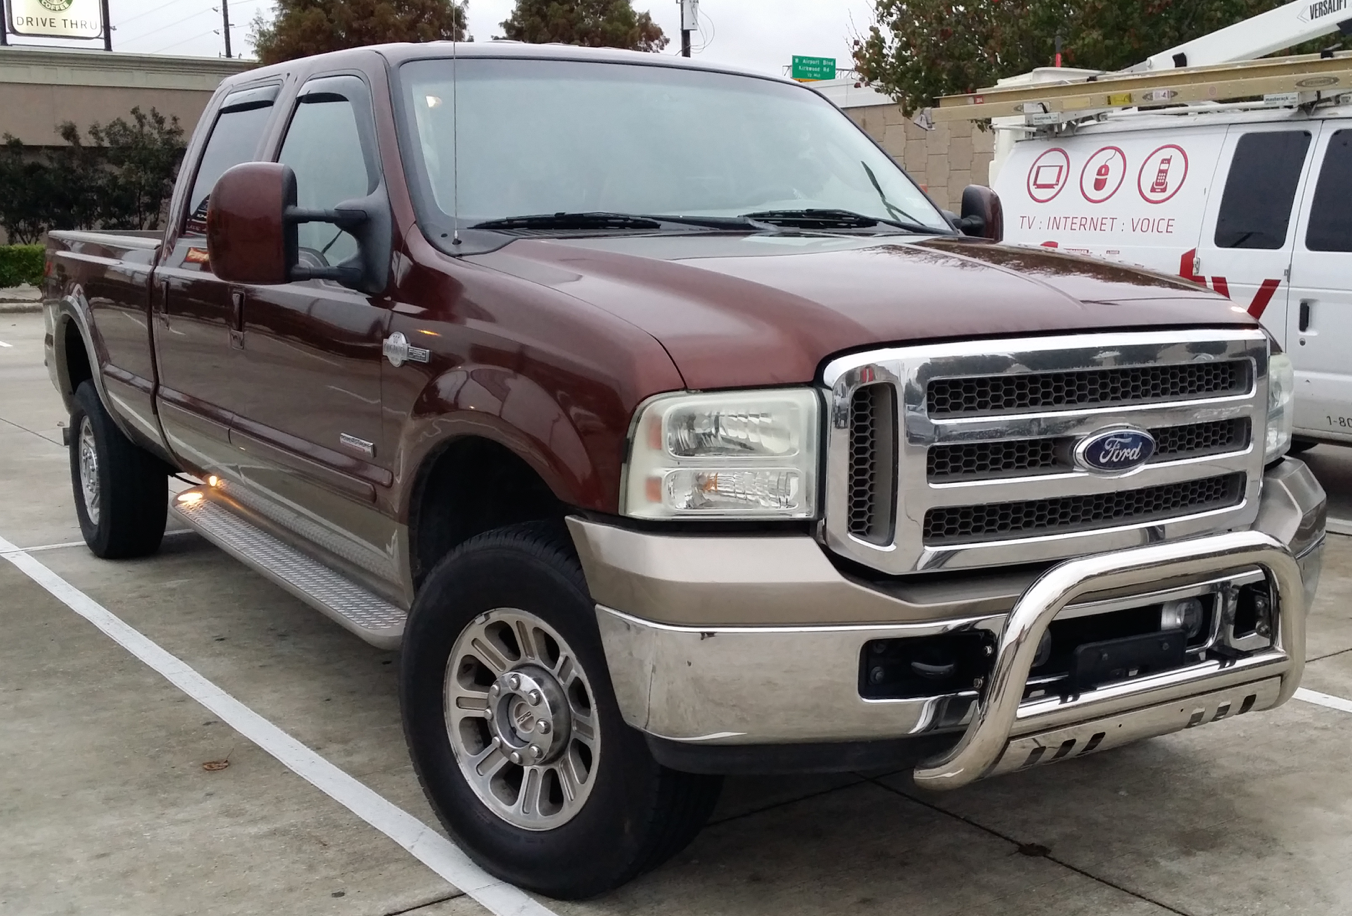 Ford f350 diesel will not start after wreck #2